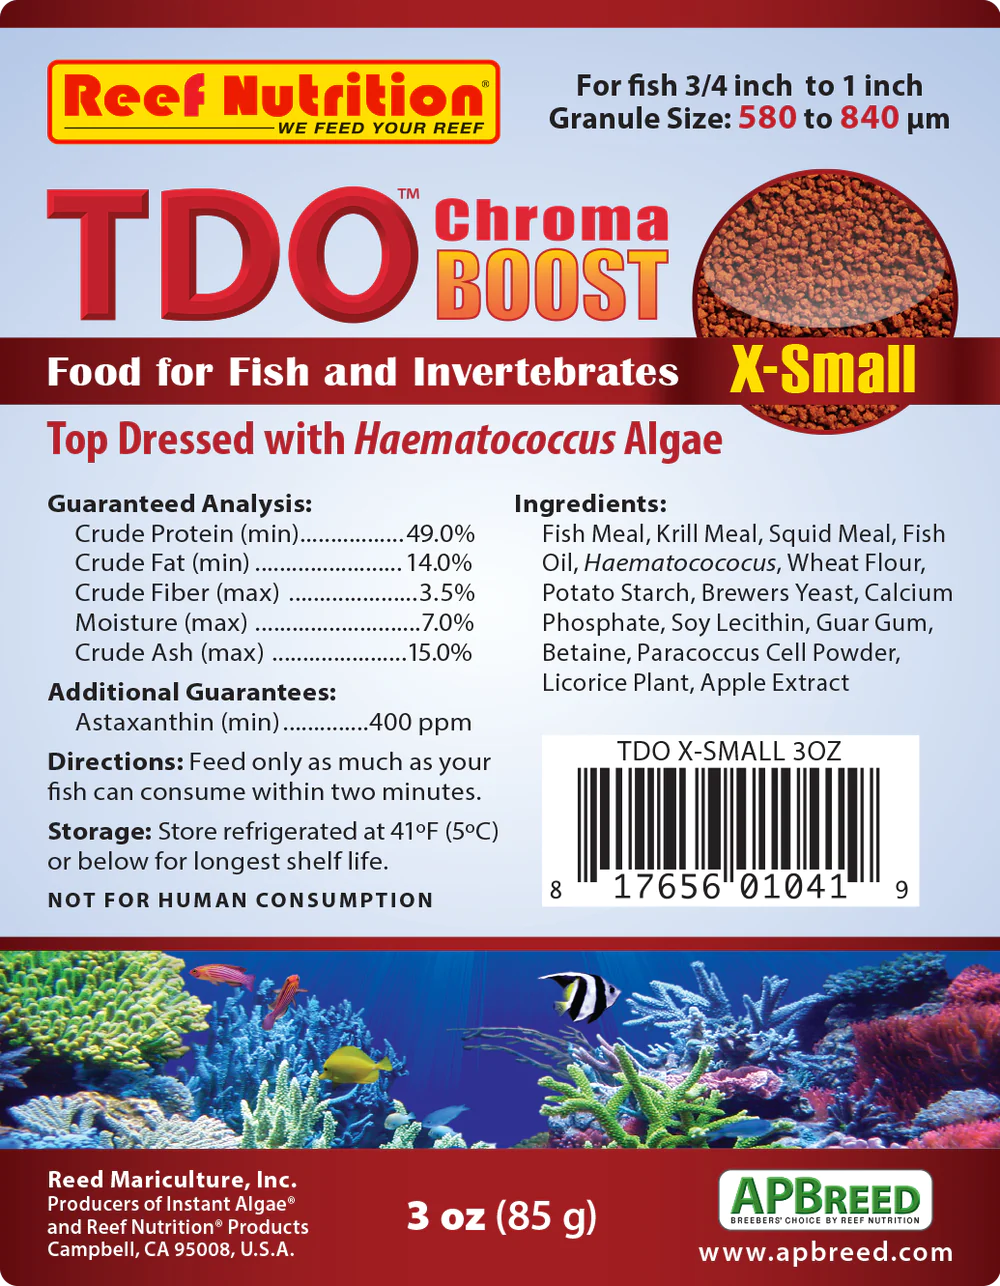 Reef Nutrition 3oz Extra small TDO-C1 Chroma Boost Food